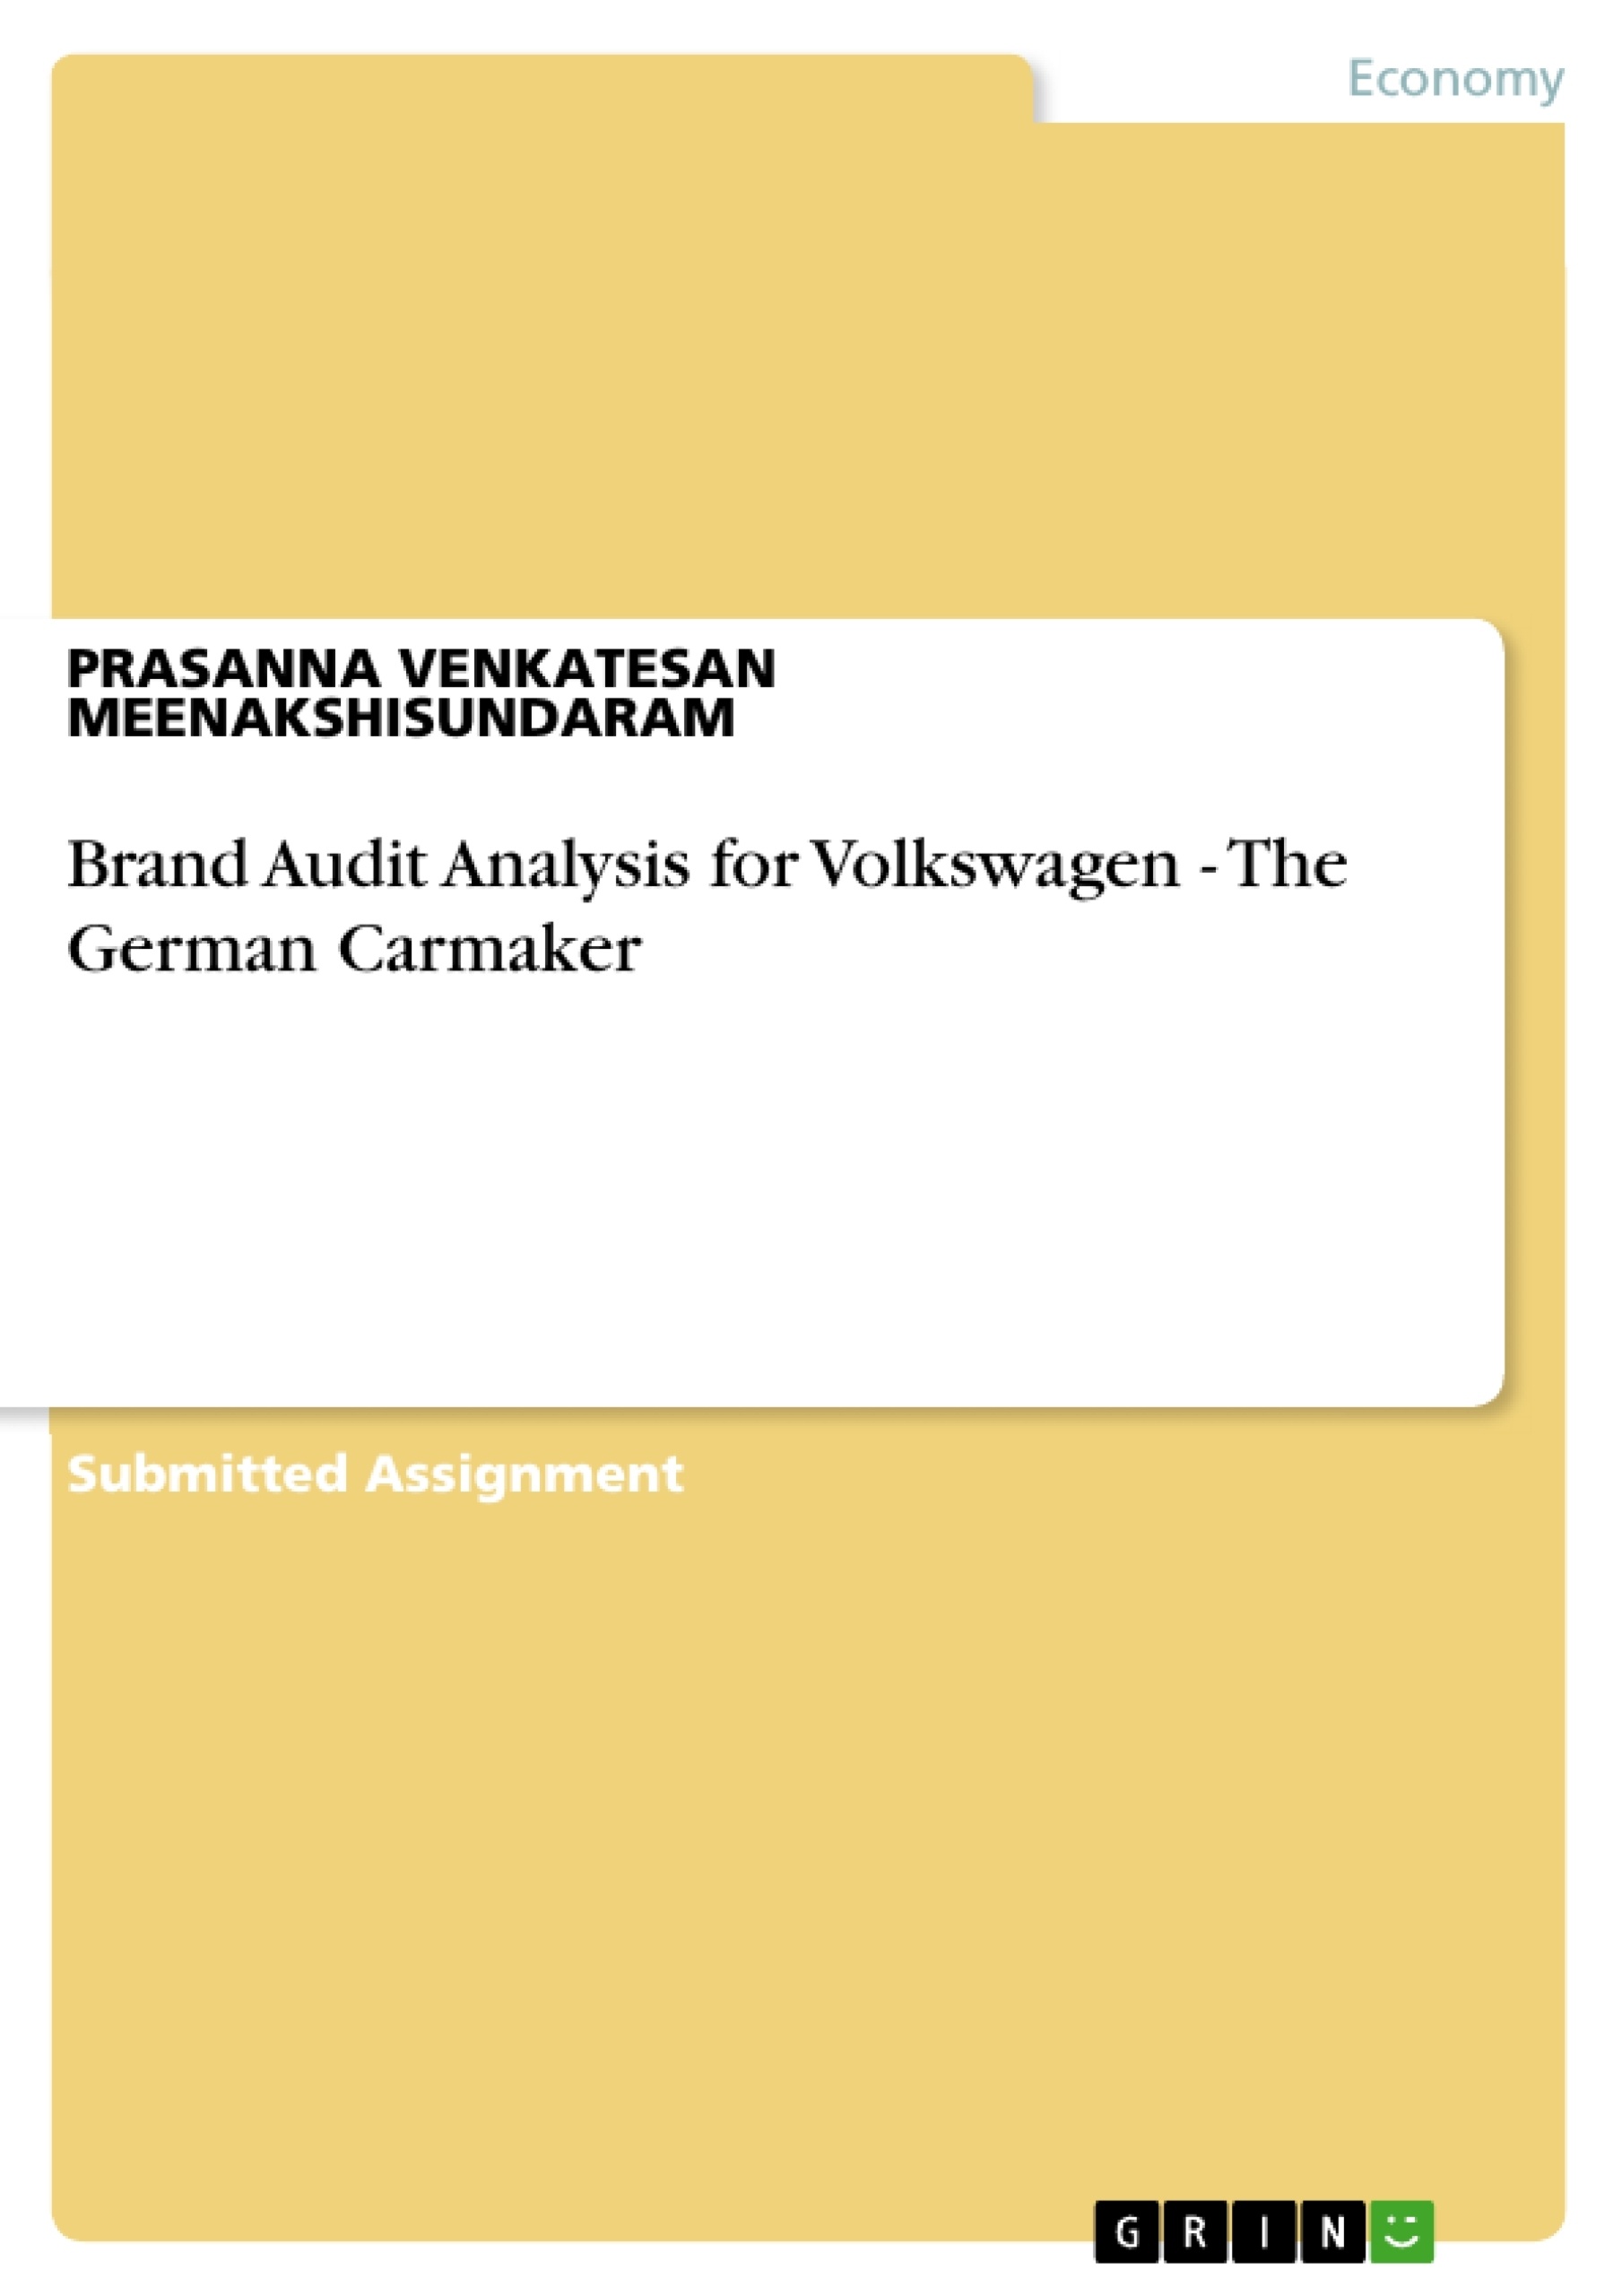 Title: Brand Audit Analysis for Volkswagen - The German Carmaker